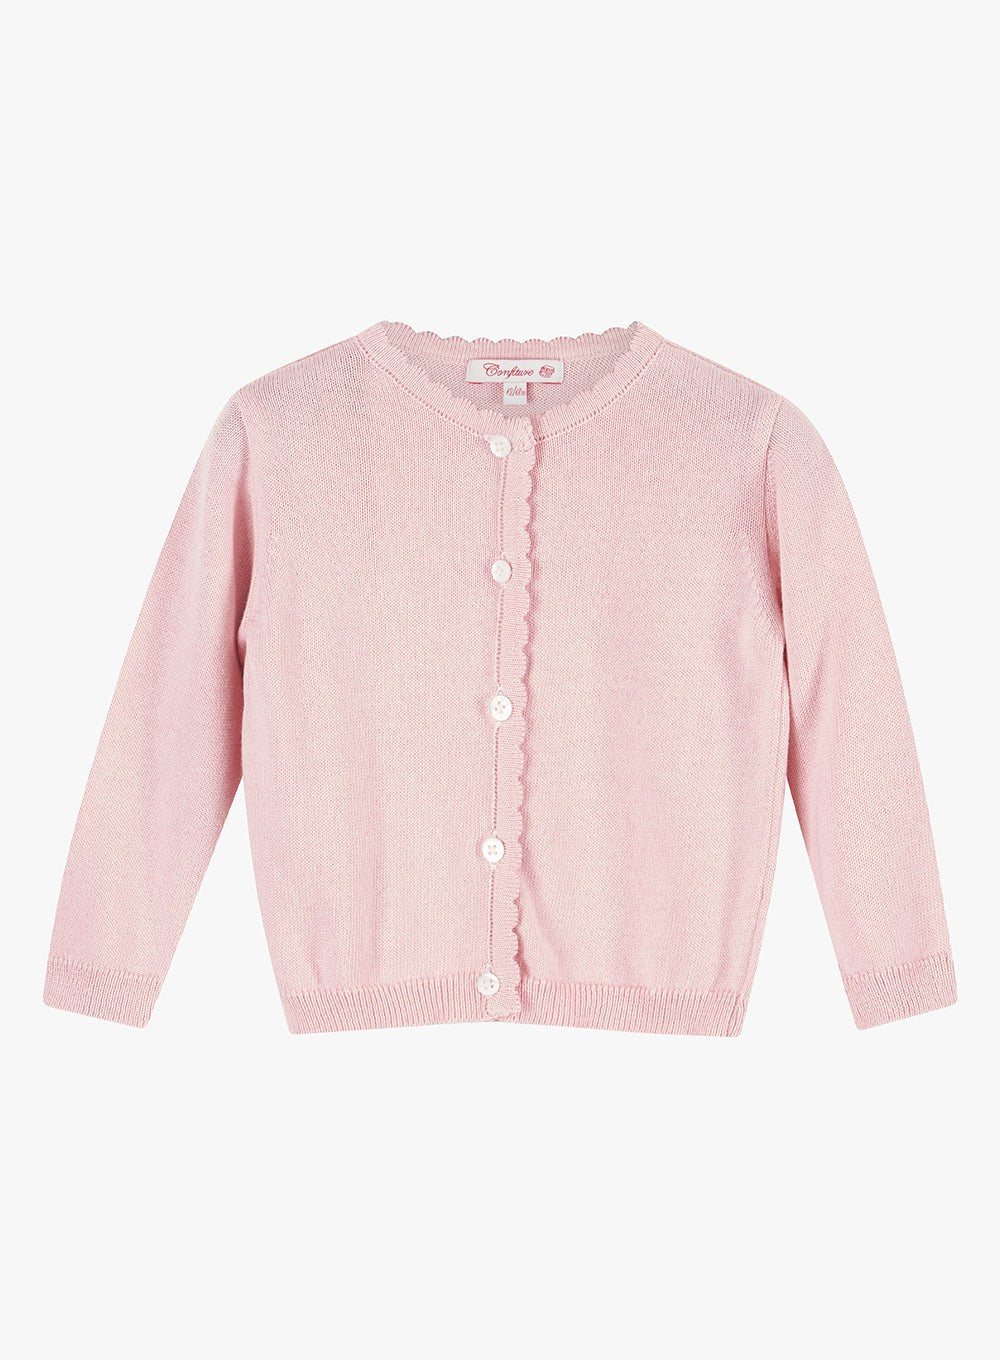 Confiture Cardigan Little Pretty Scalloped Edge Cardigan in Pale Pink